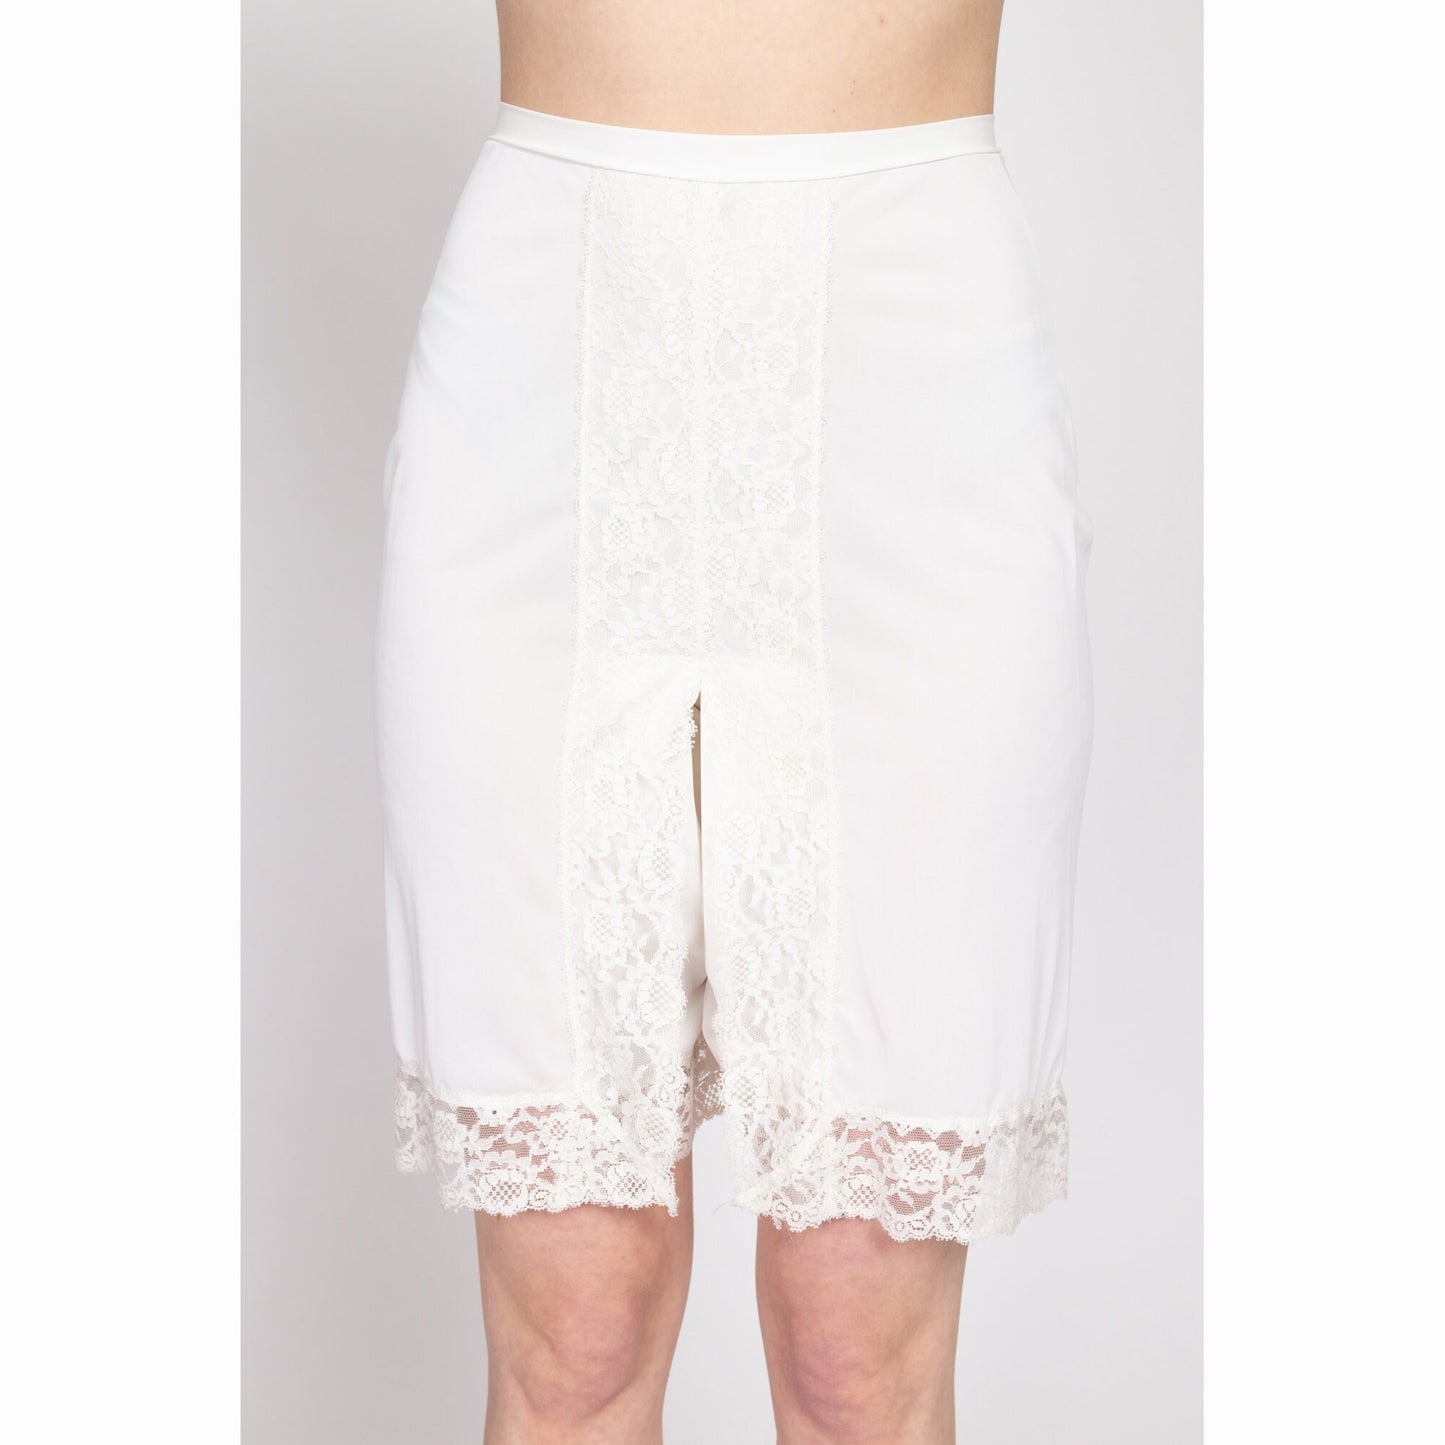 Small 70s White Lace Trim Bloomers | Vintage High Waisted Pettipants Retro Lingerie